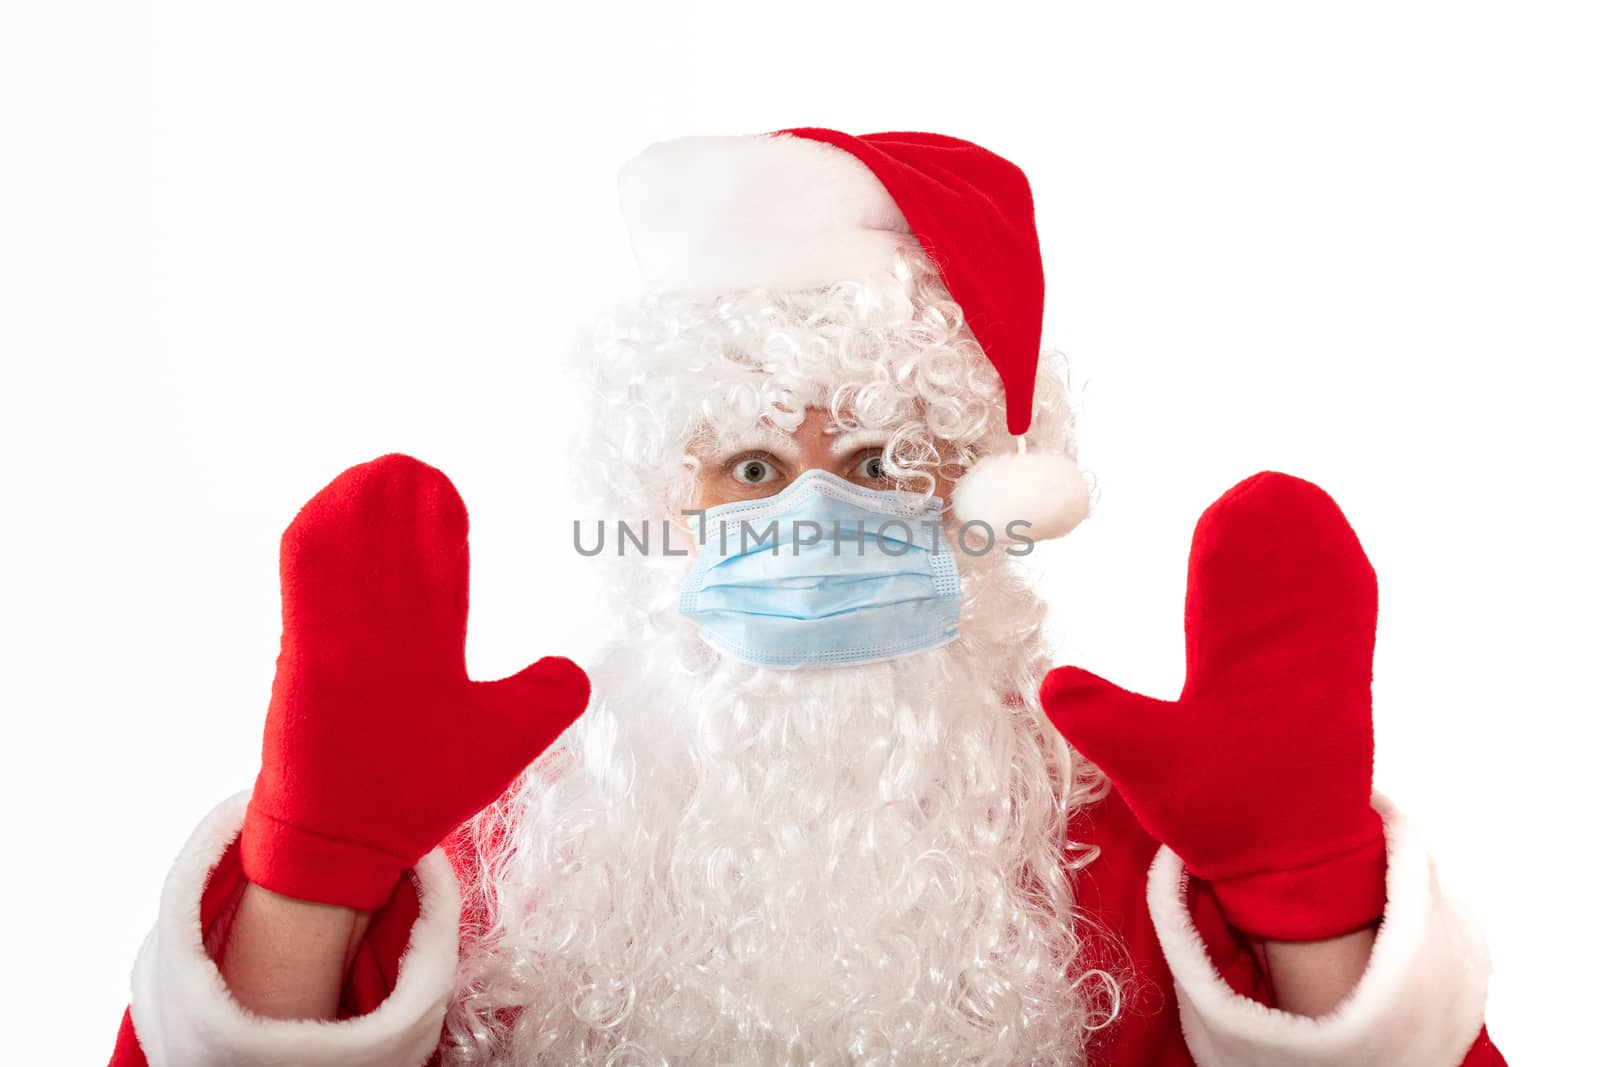 View of a man wearing a Santa Claus costume, medical mask and having his both hands up, eyes wide open, as if warning or stopping something, isolated on white background. Pandemic holiday concepts by DamantisZ